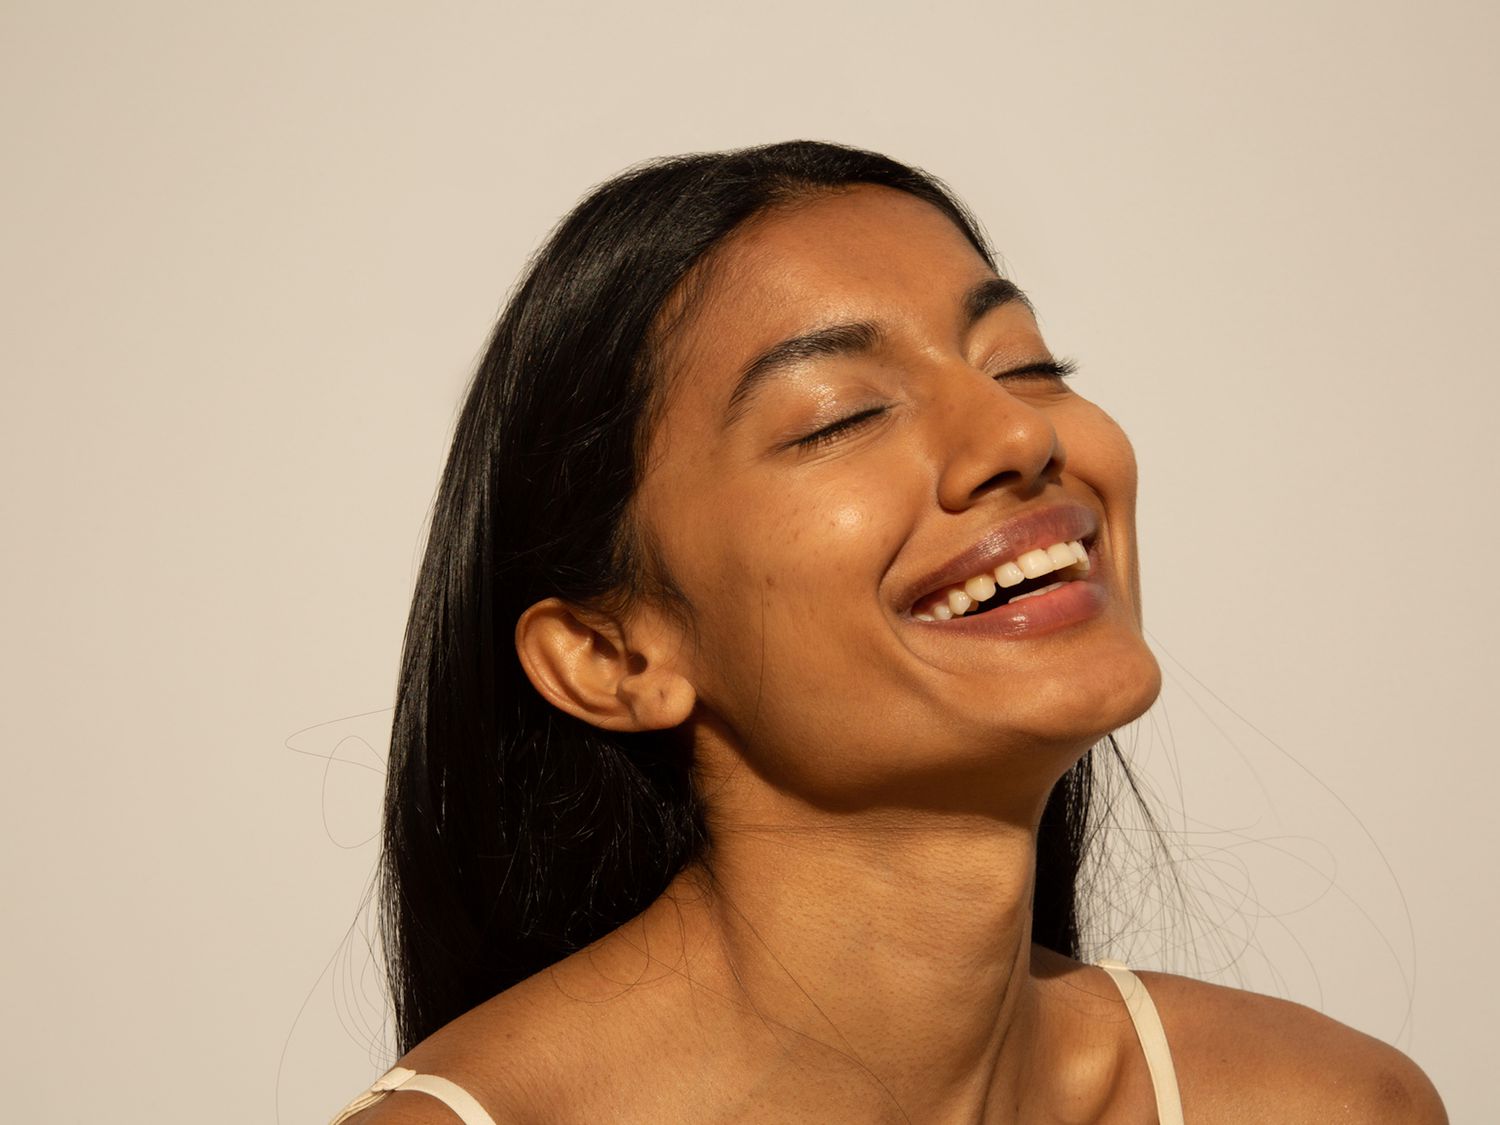 Woman smiling with glowing skin in sunlight